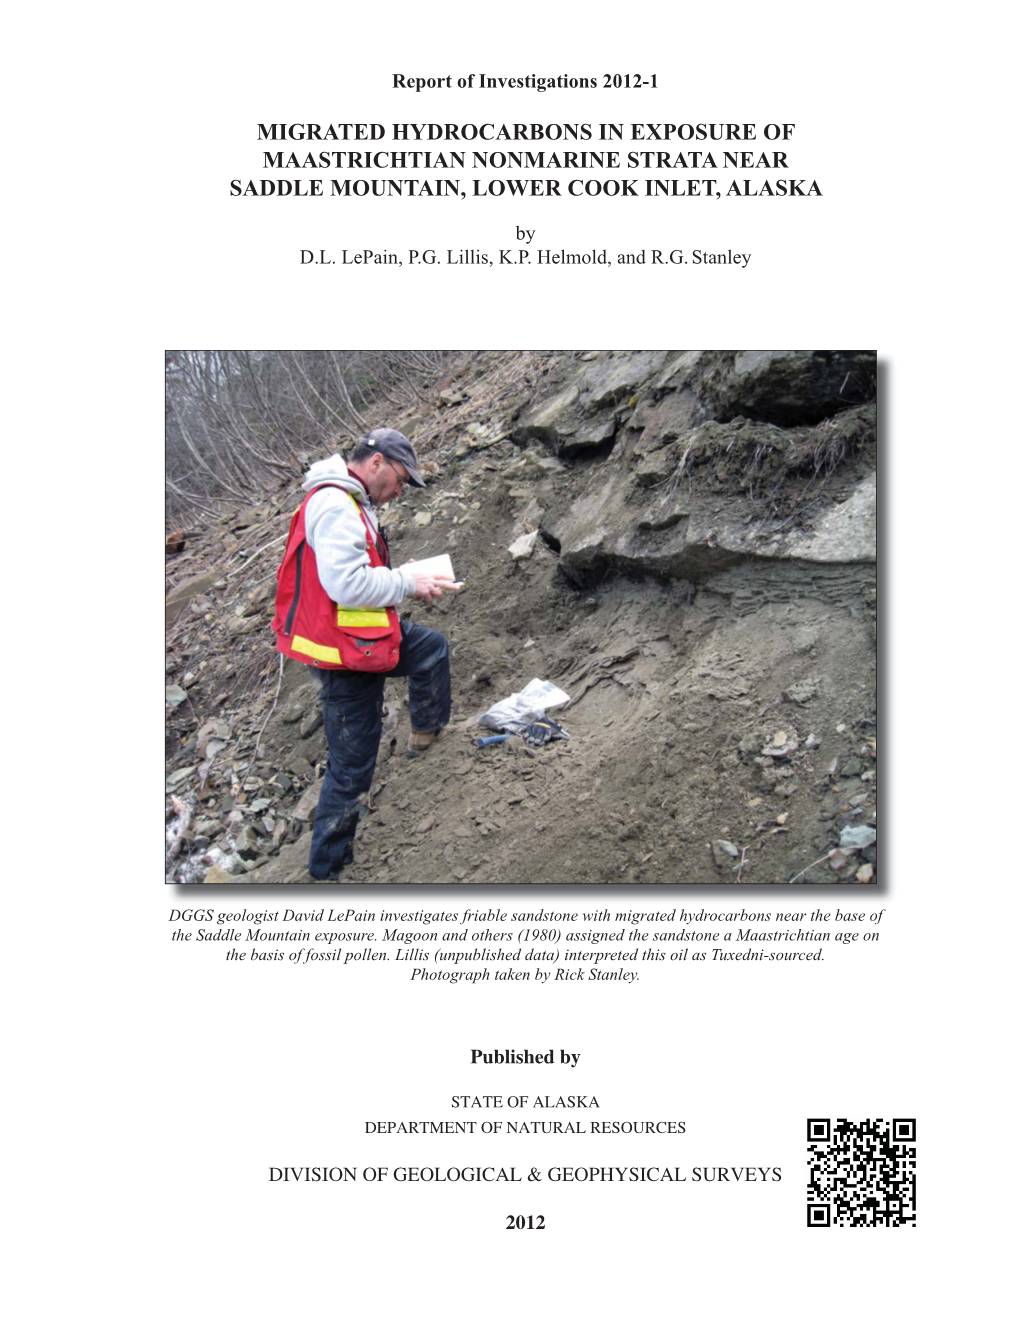 Migrated Hydrocarbons in Exposure of Maastrichtian Nonmarine Strata Near Saddle Mountain, Lower Cook Inlet, Alaska